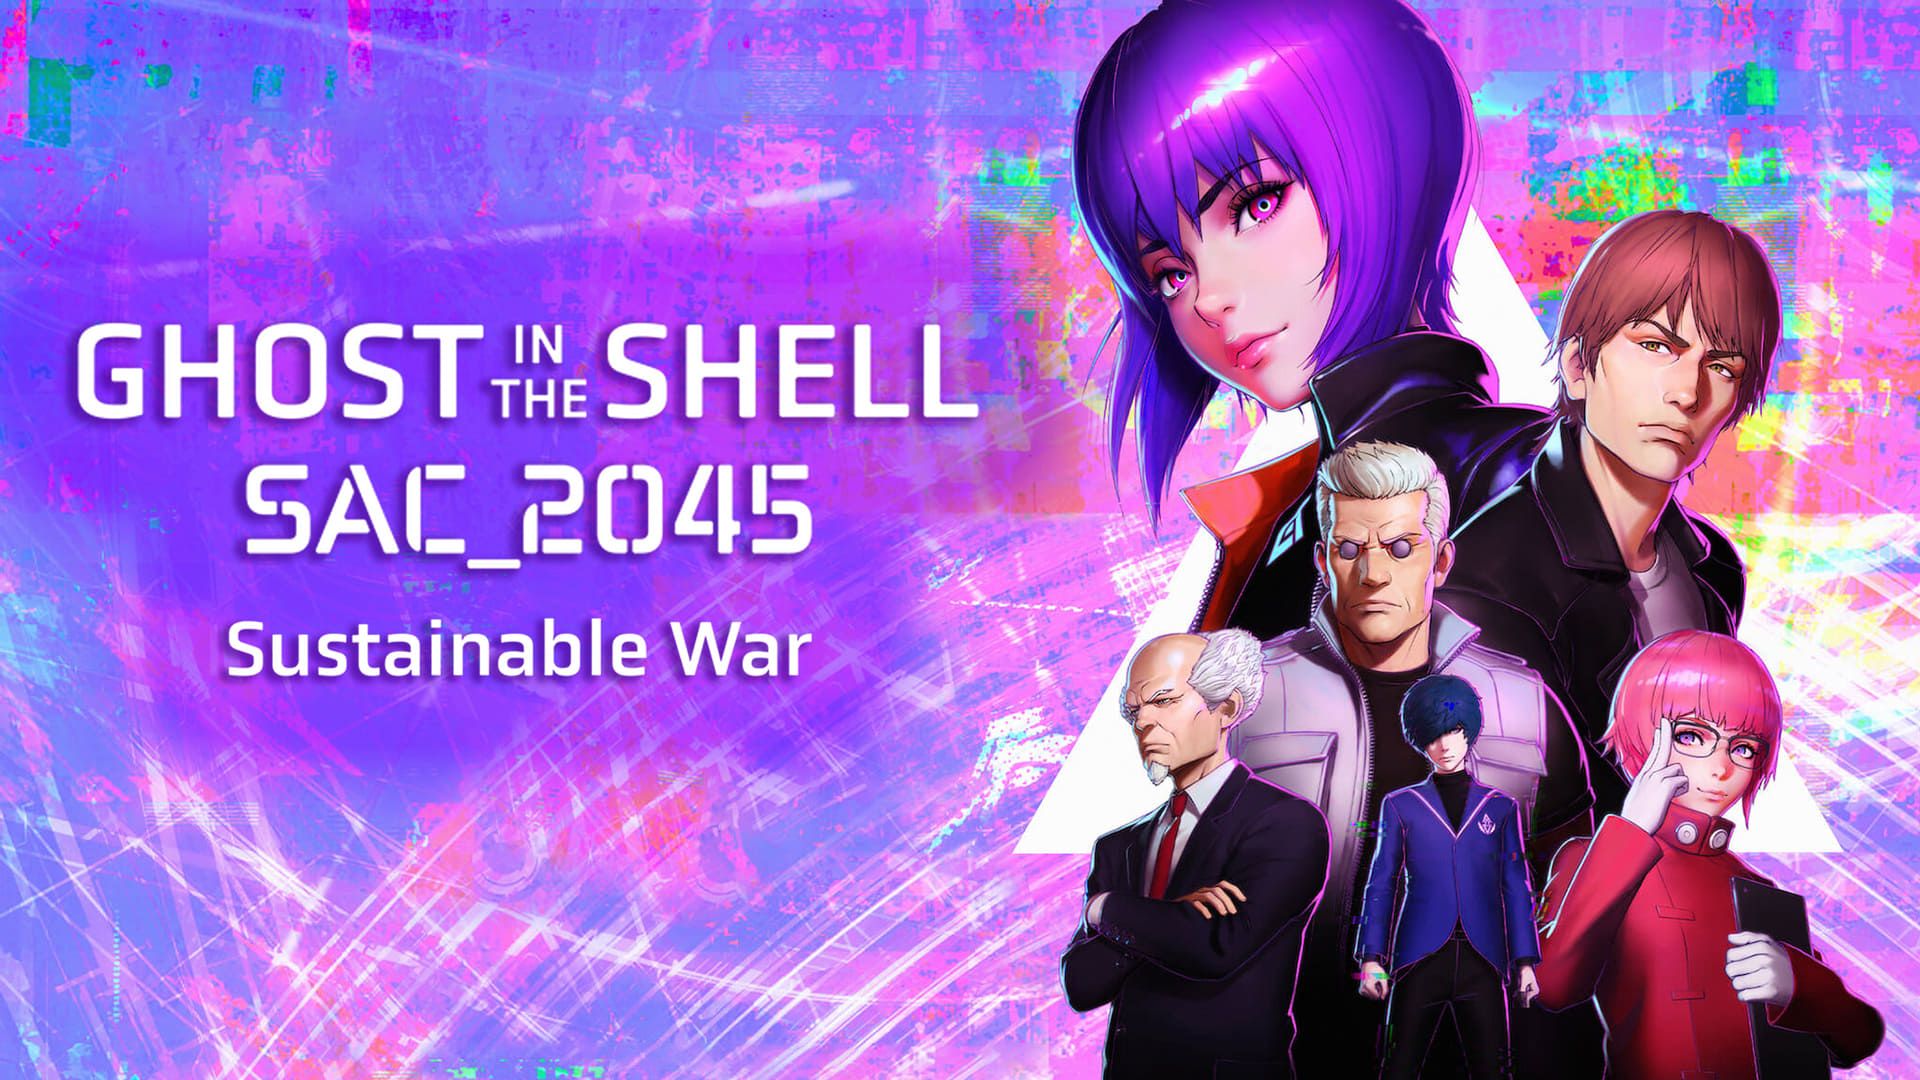 Ghost in the Shell: SAC_2045 Guerra Sustentável